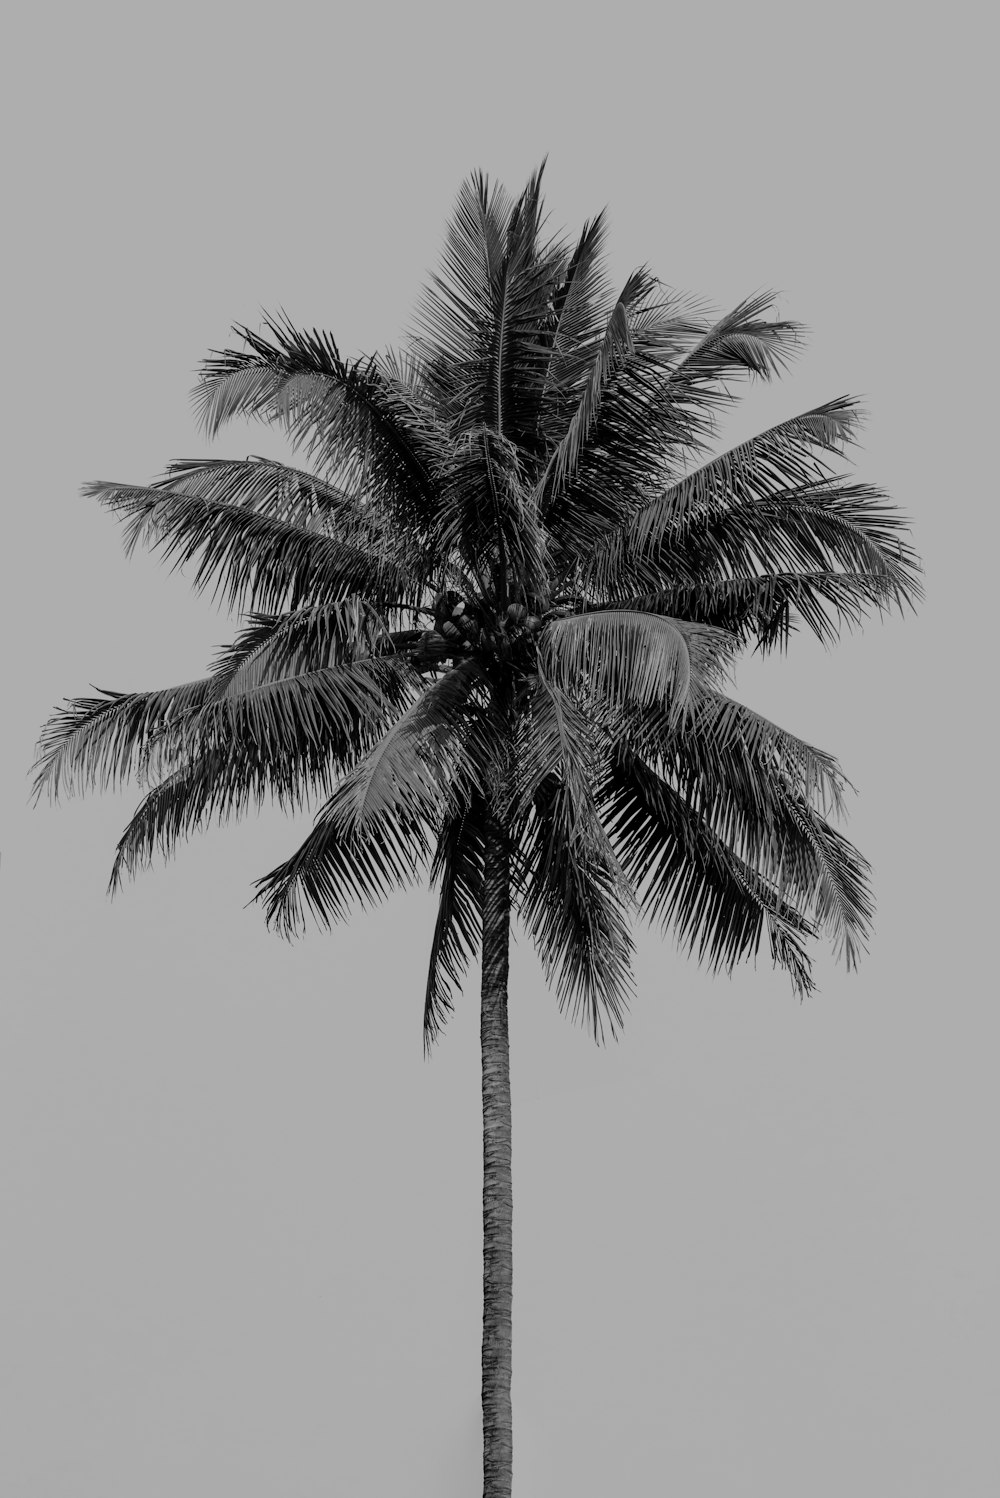 a black and white photo of a palm tree